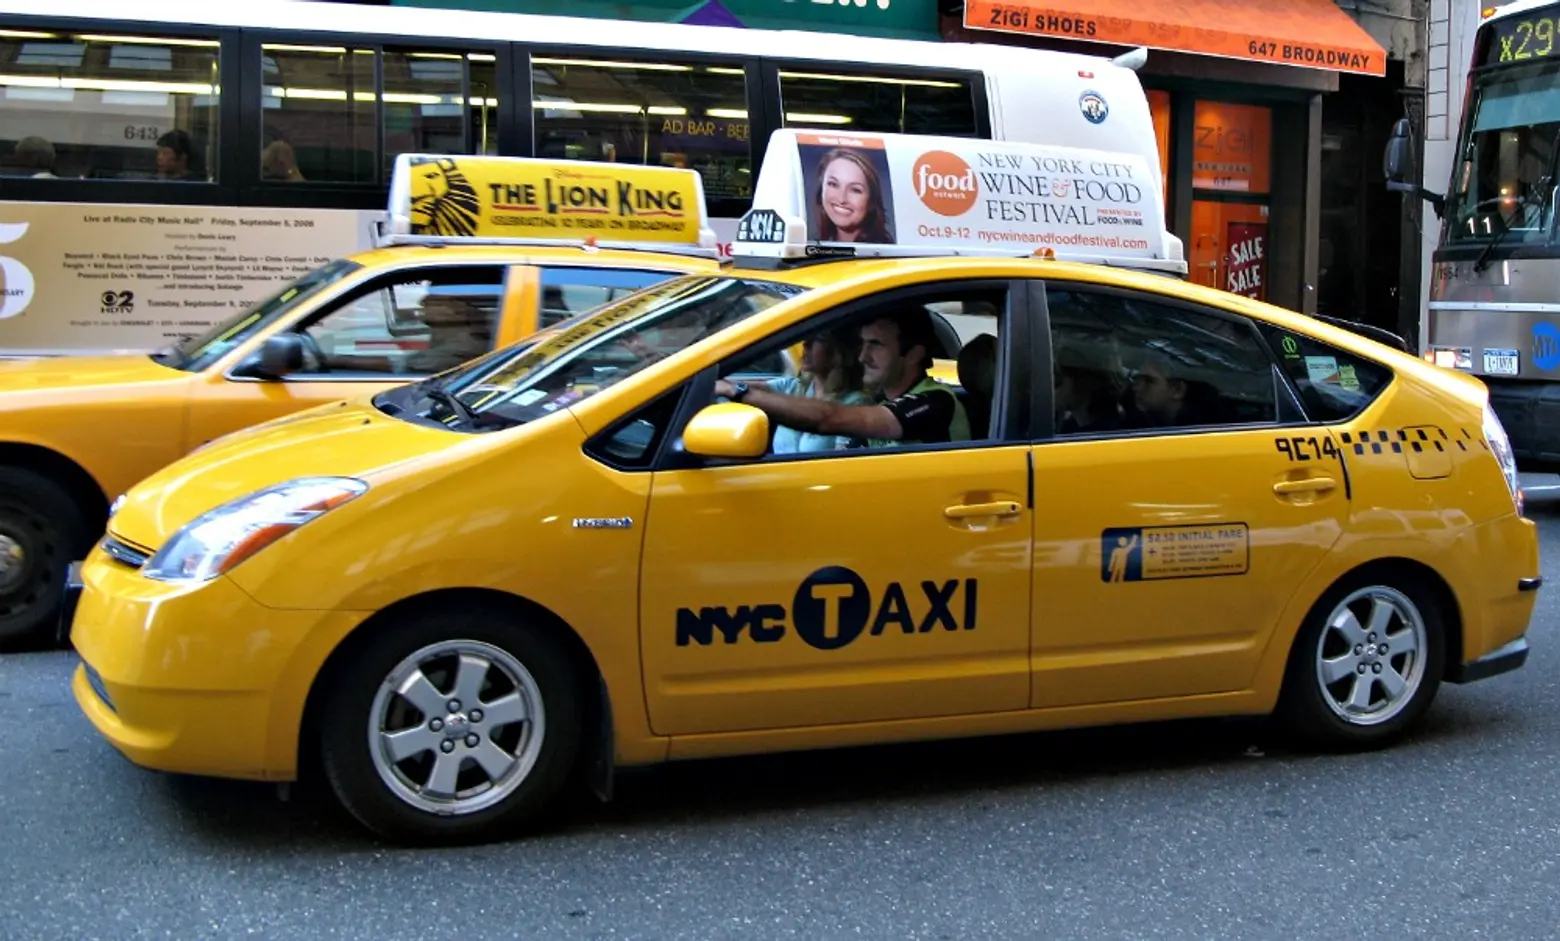 Another blow to Uber, ride-hailing app launches for NYC yellow taxis